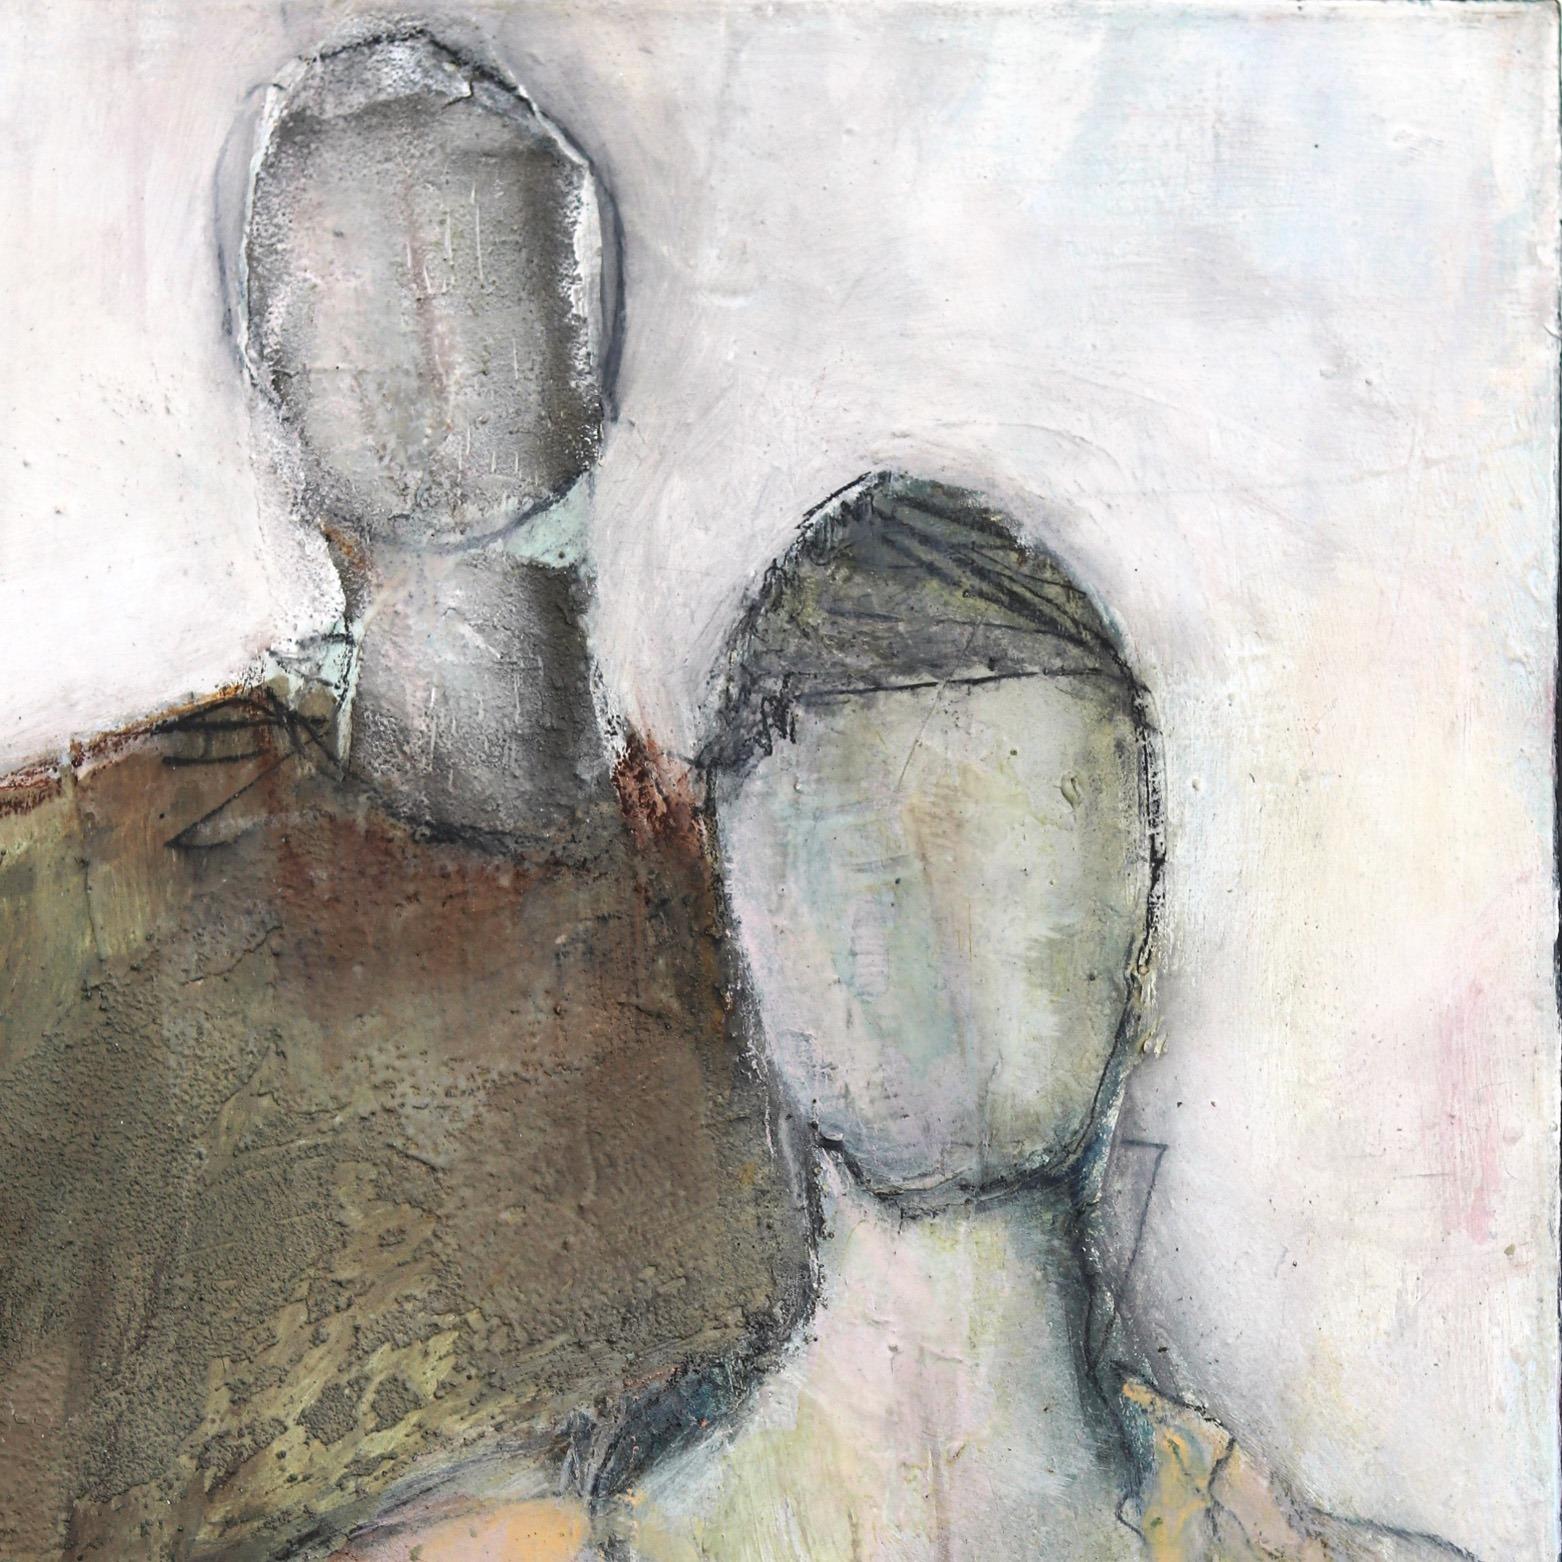 Swiss artist Edith Konrad paints figurative abstract compositions with mixed media on canvas. She layers her expression of her emotional response to the subjects with dynamic textures and subtle patterns in her artworks. The thick layers of paint